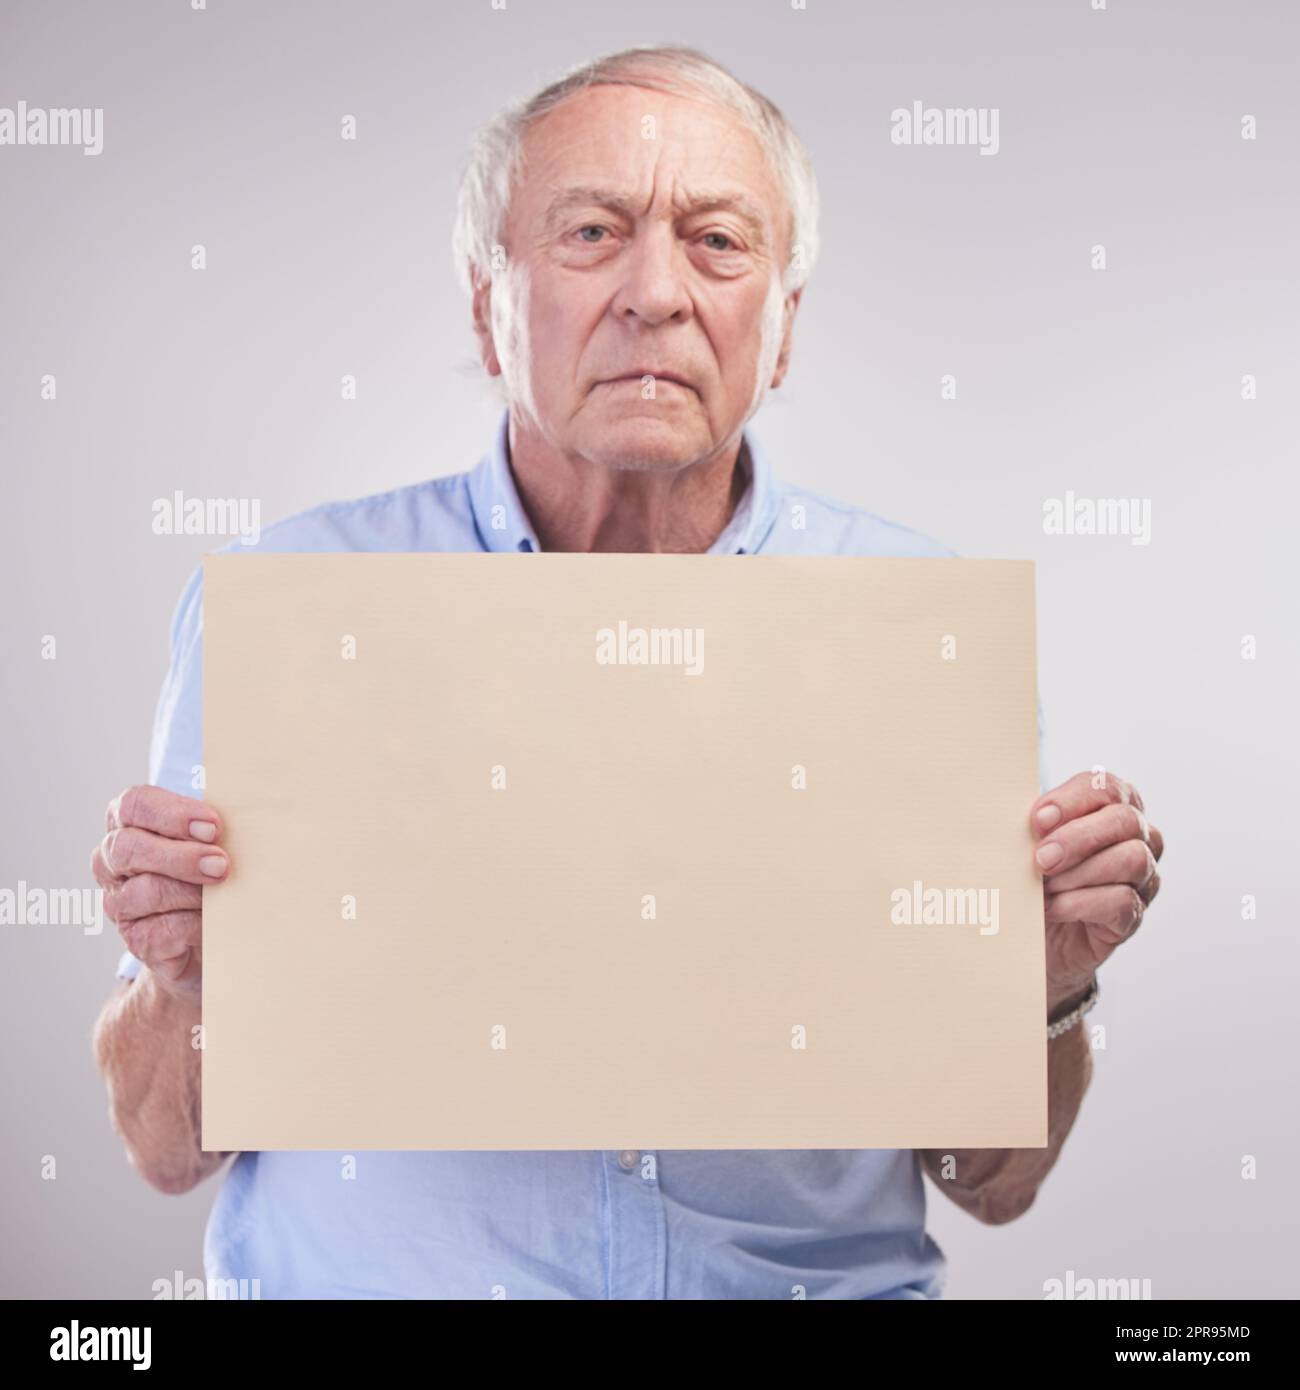 Listen up folks... Studio shot of a senior man holding a blank sign against a grey background. Stock Photo